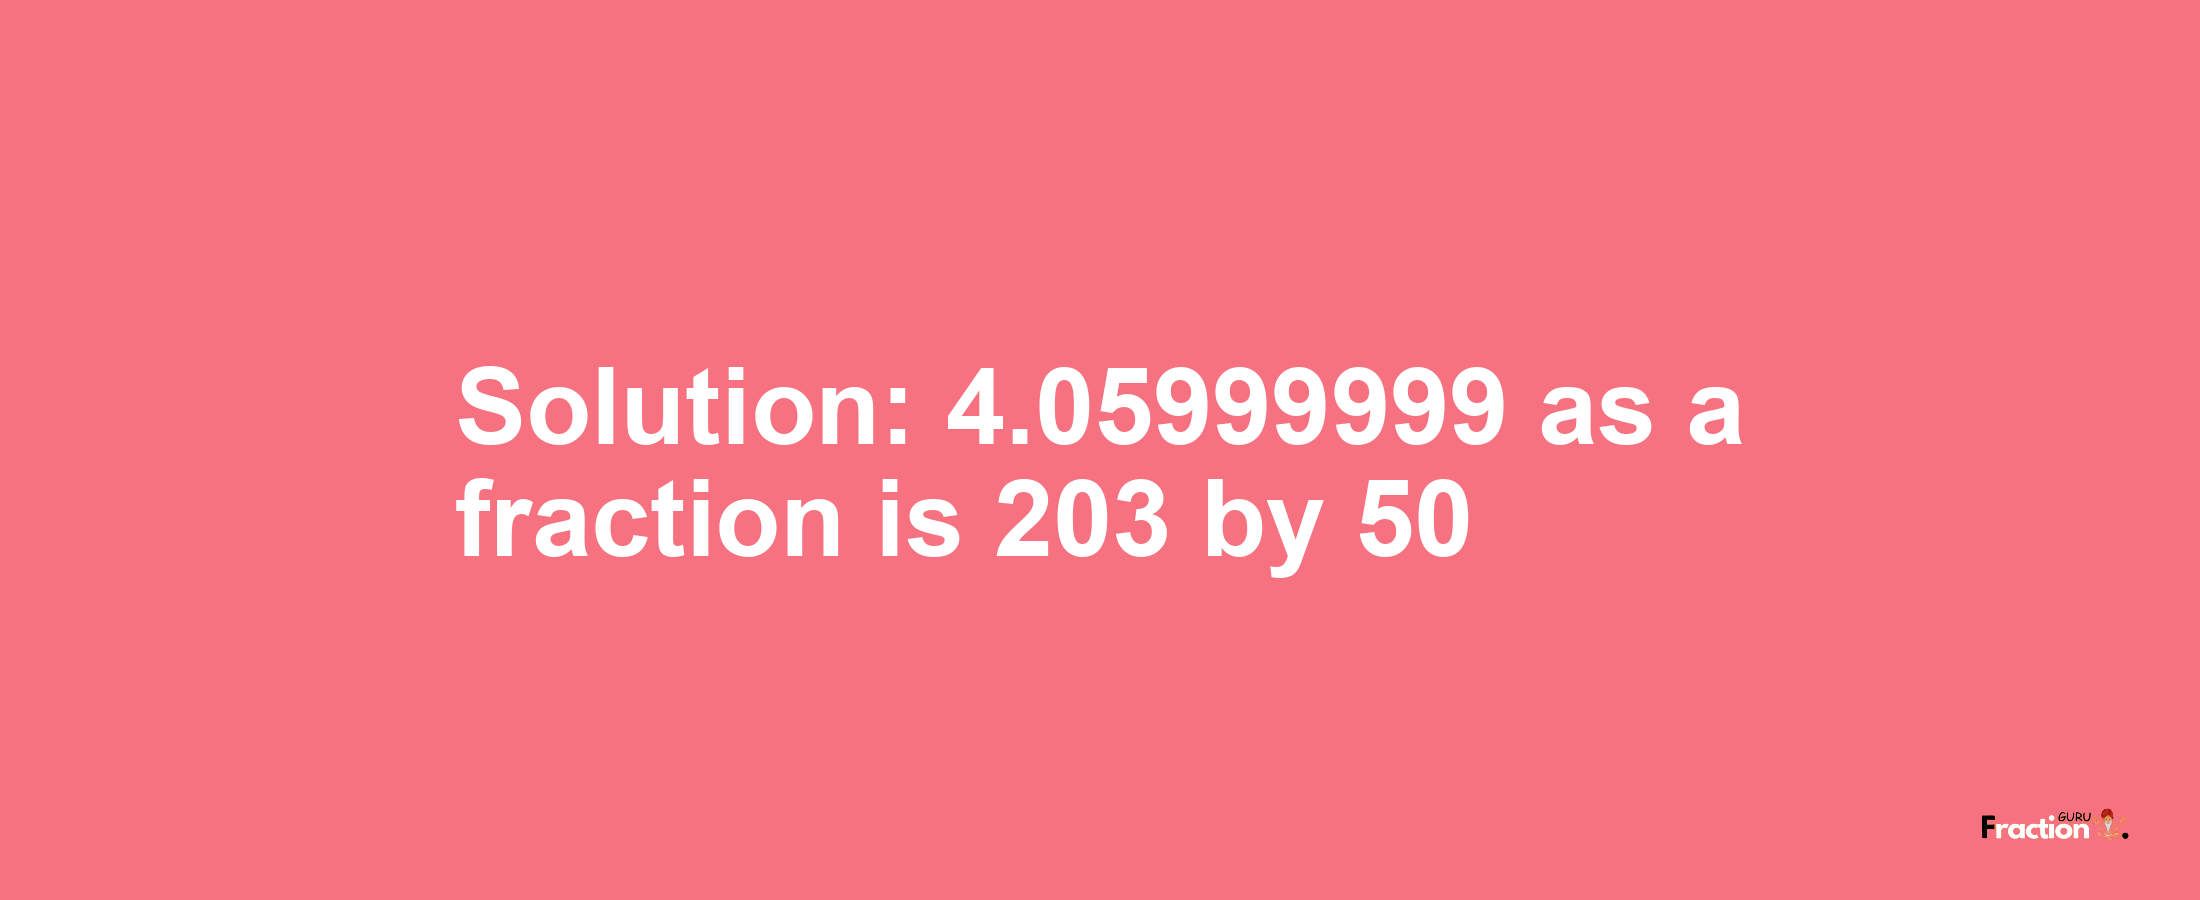 Solution:4.05999999 as a fraction is 203/50